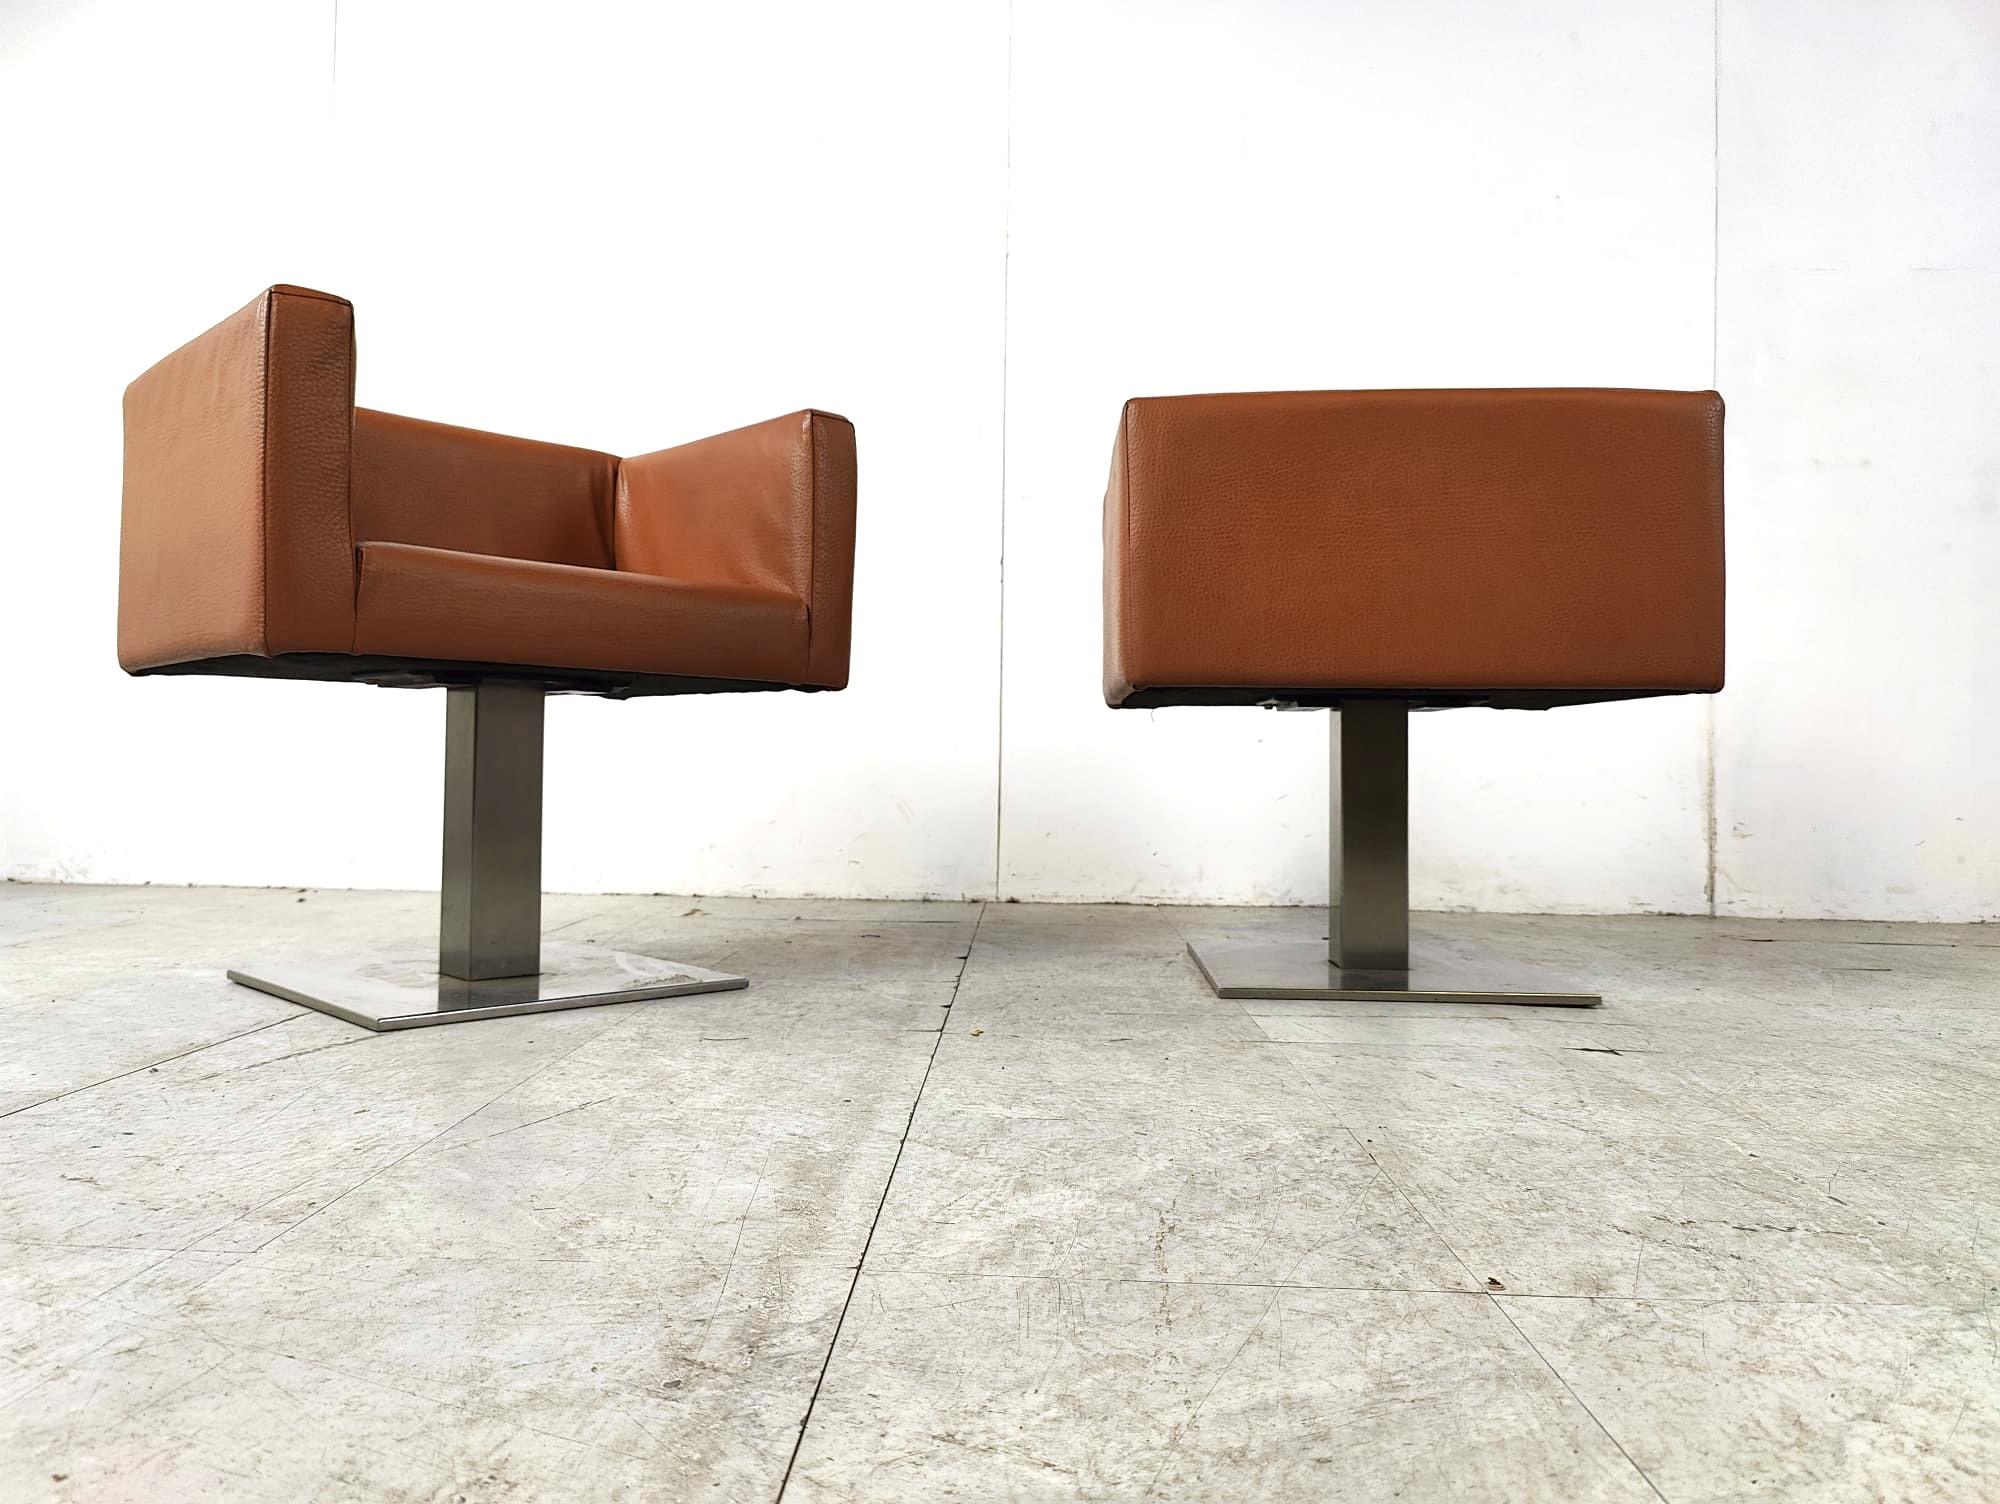 Modern Italian cognac leather armchairs with a chromed base.

Beautiful timeless design.

1990s - Italy

Height: 65cm
Width: 62cm
Depth: 50cm
Seat height: 44cm

Ref: 101233

*Price is for the pair